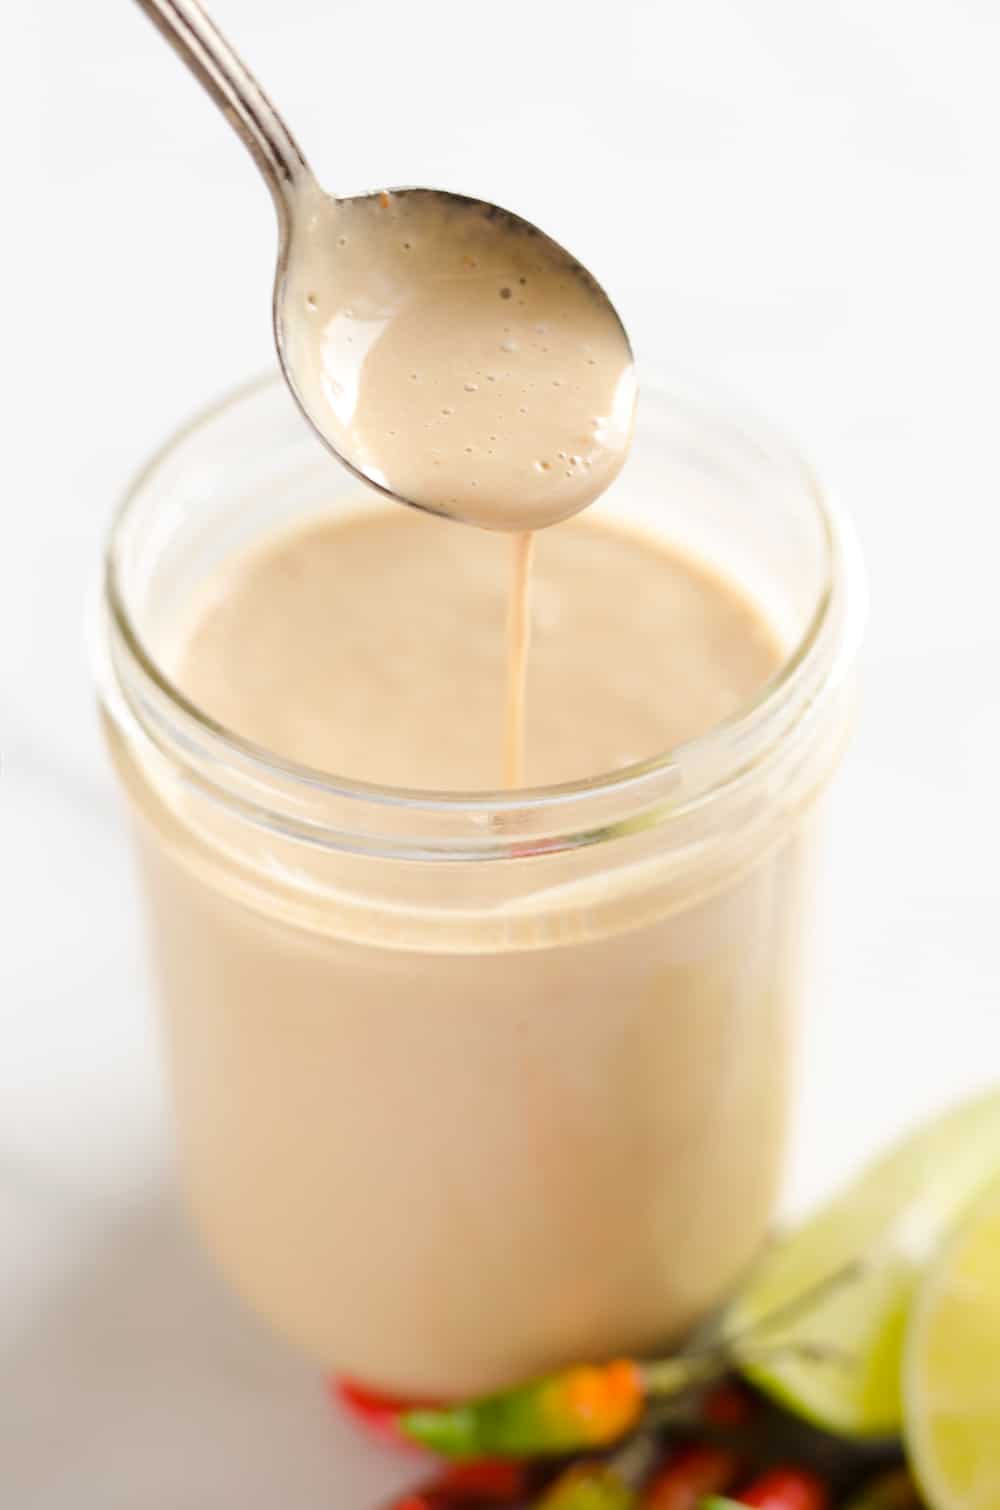 Thai Peanut Sauce is a quick sauce that is bursting with rich and spicy flavors. It is perfect on chicken or your favorite salad to kick up your meal a notch. 